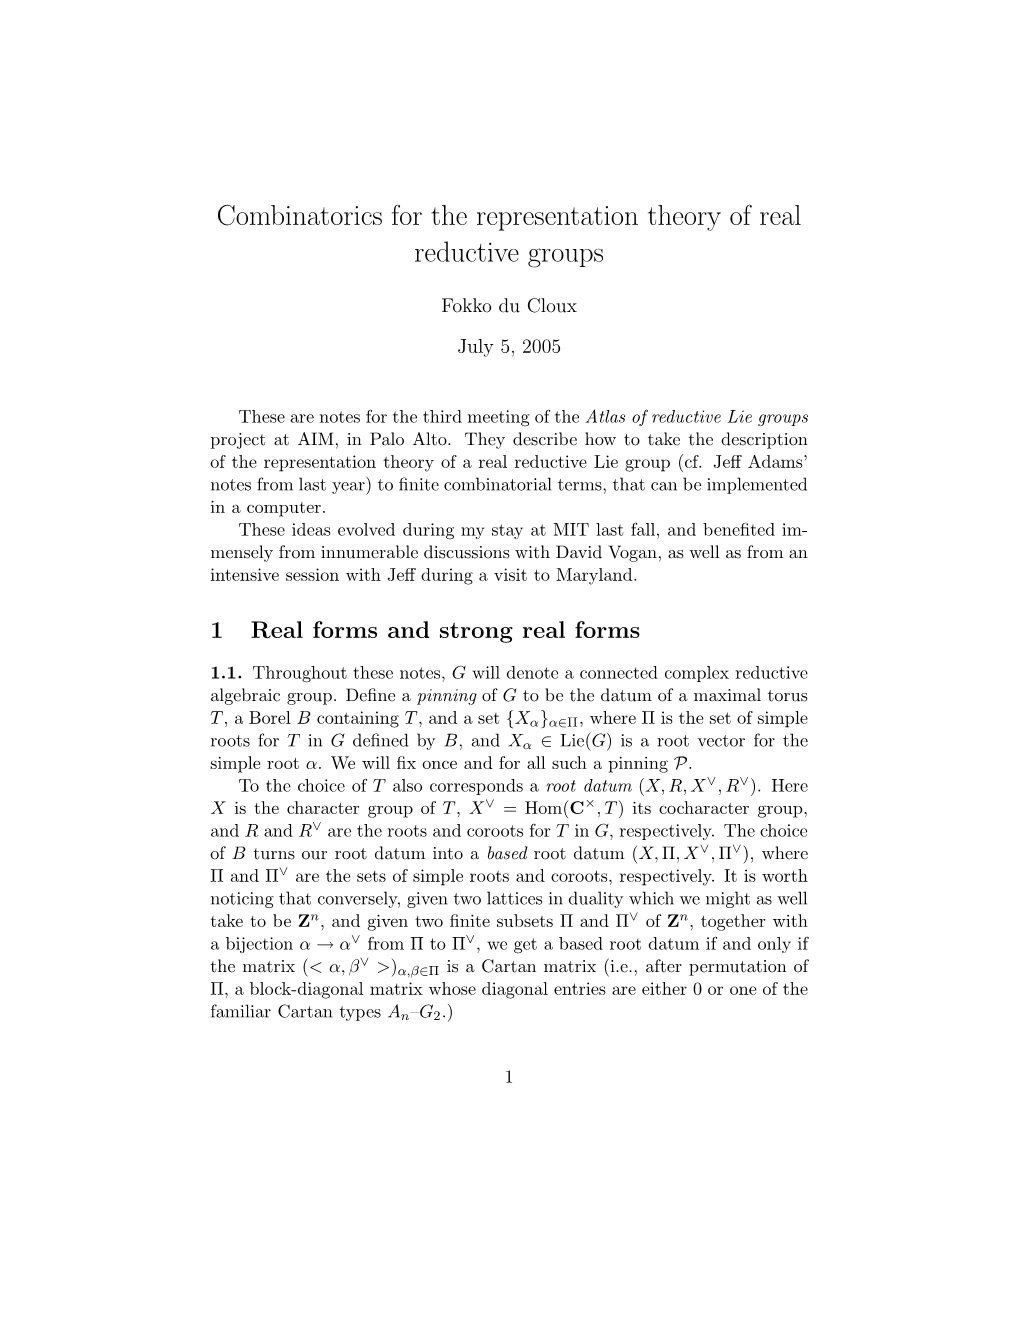 Combinatorics for the Representation Theory of Real Reductive Groups